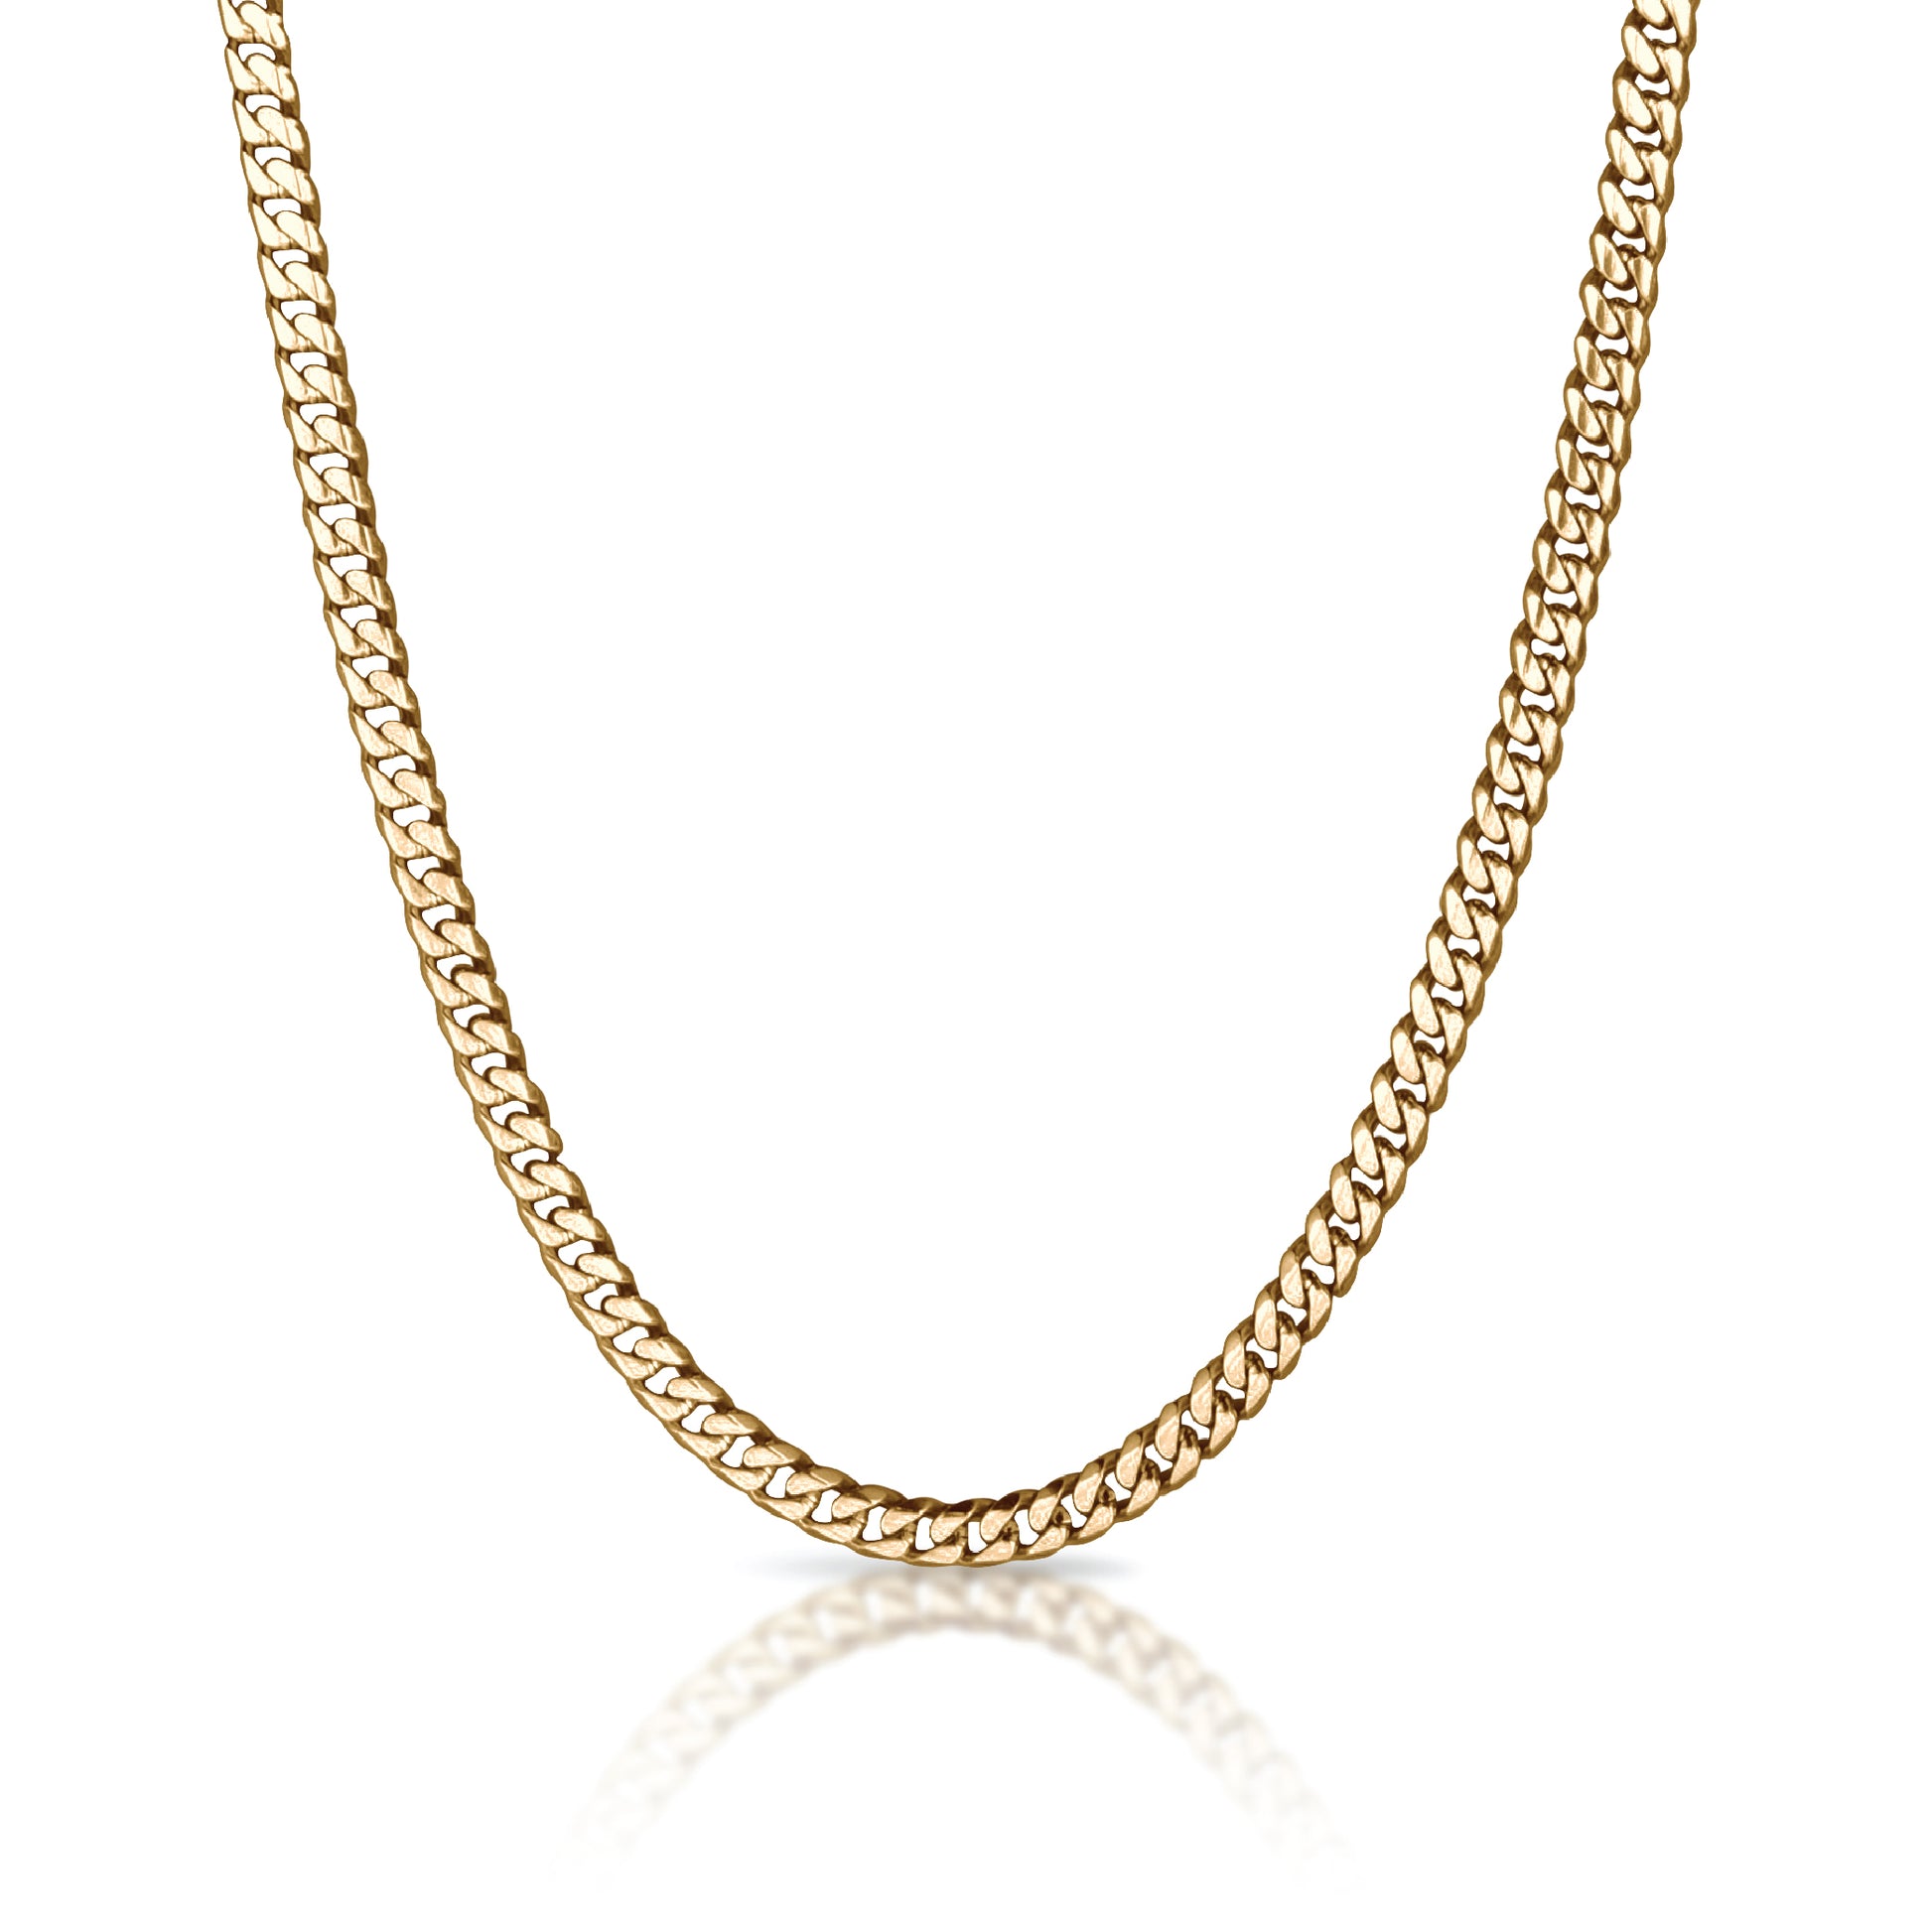 6mm Cuban Link Chain Necklace - 14K Gold Plated Stainless Steel